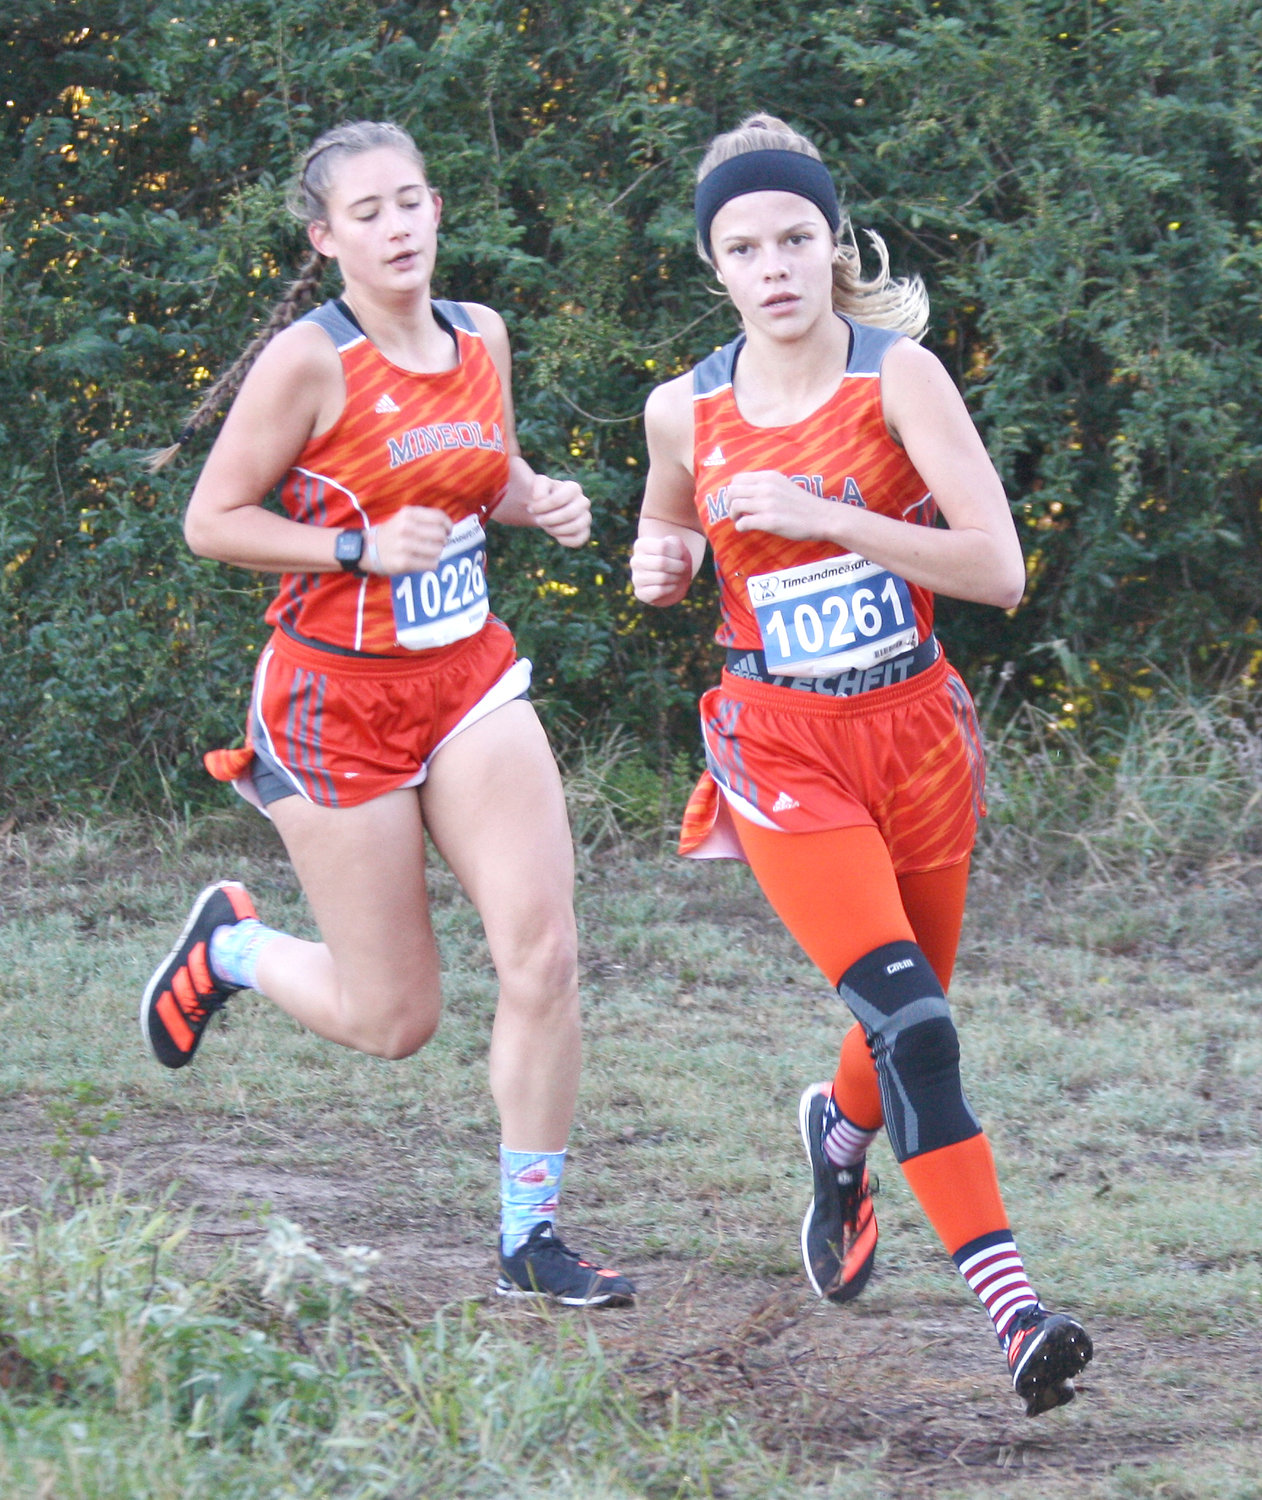 Mineola’s Hannah Zoch (left) finished second, and Juliana Stanley (right) finished third in the girls individual cross country competition last Saturday. The Mineola girls team captured the district crown and will proceed to regionals.